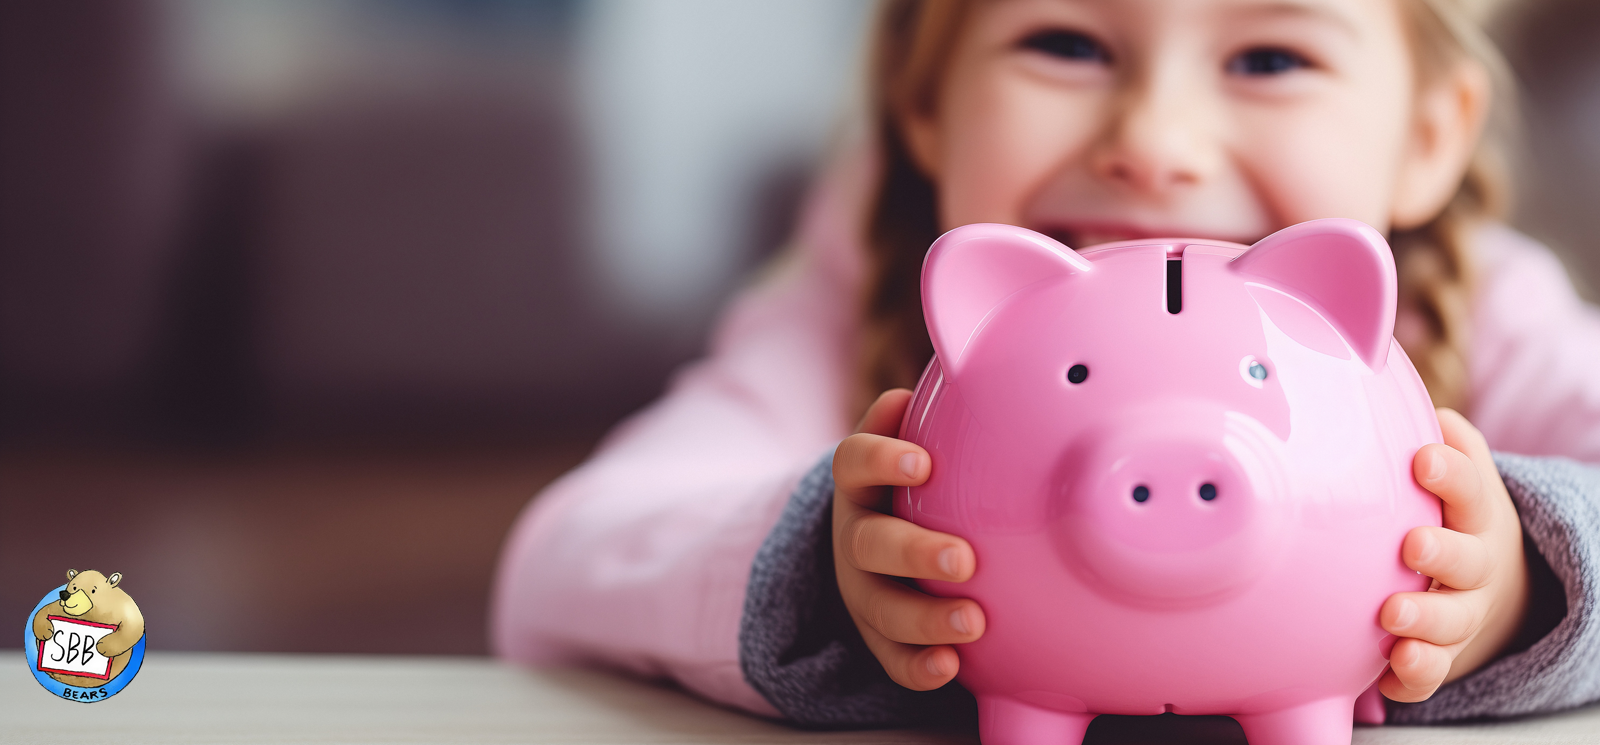 Image of child holding a pink piggy bank.